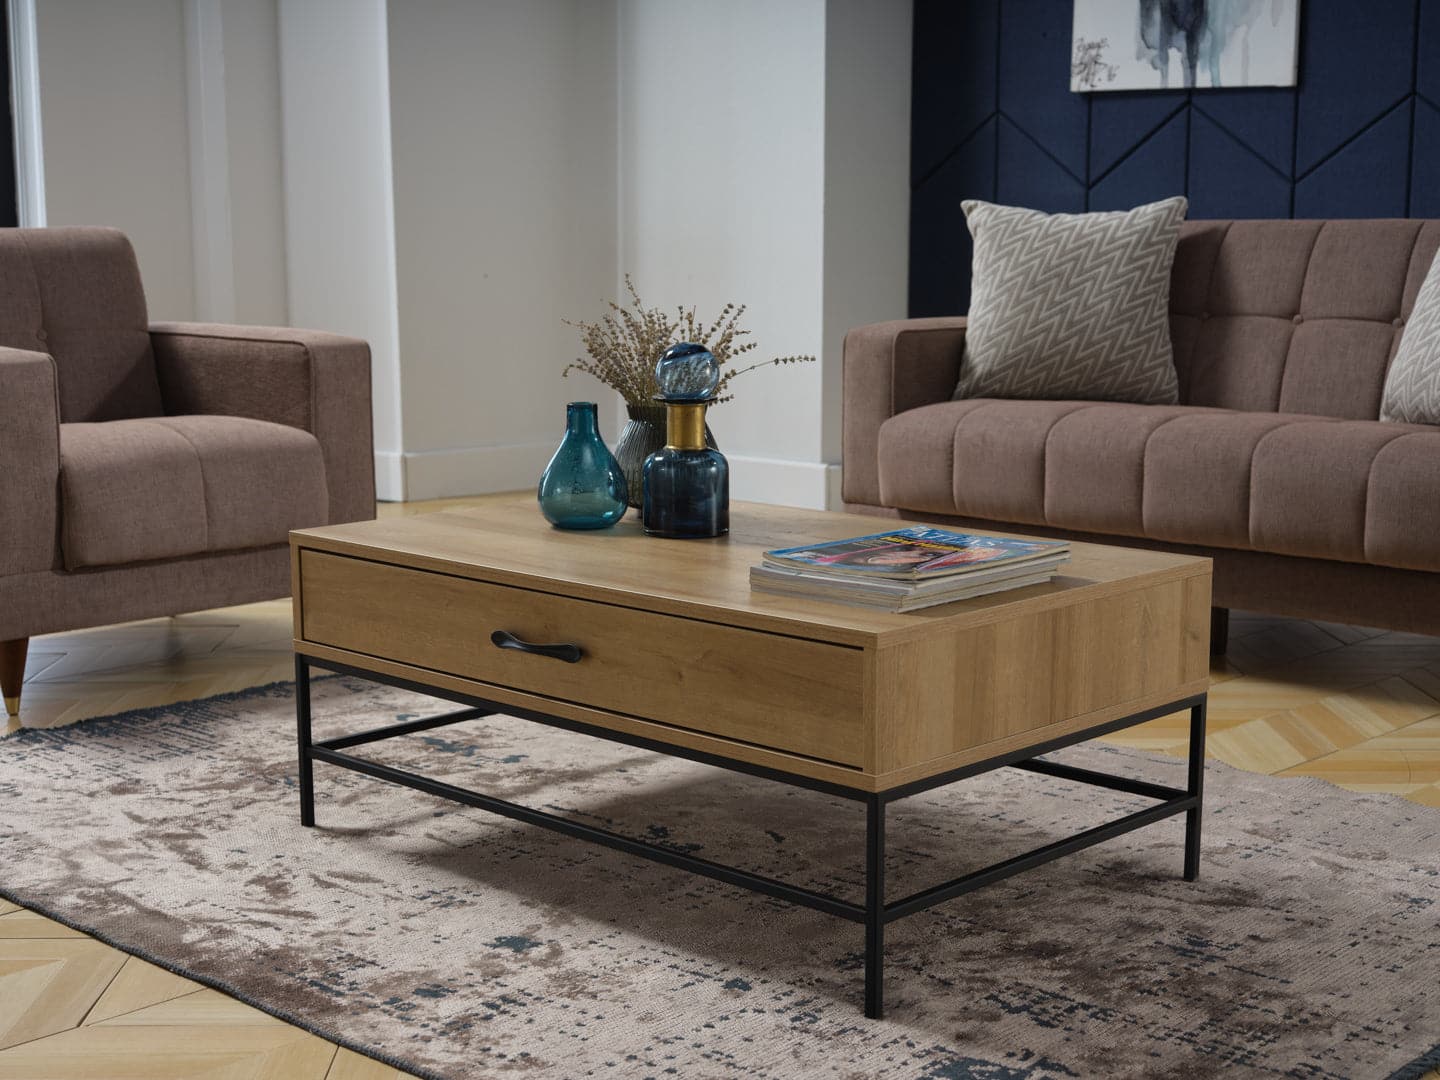 Drift Coffee Table - Home Store Furniture